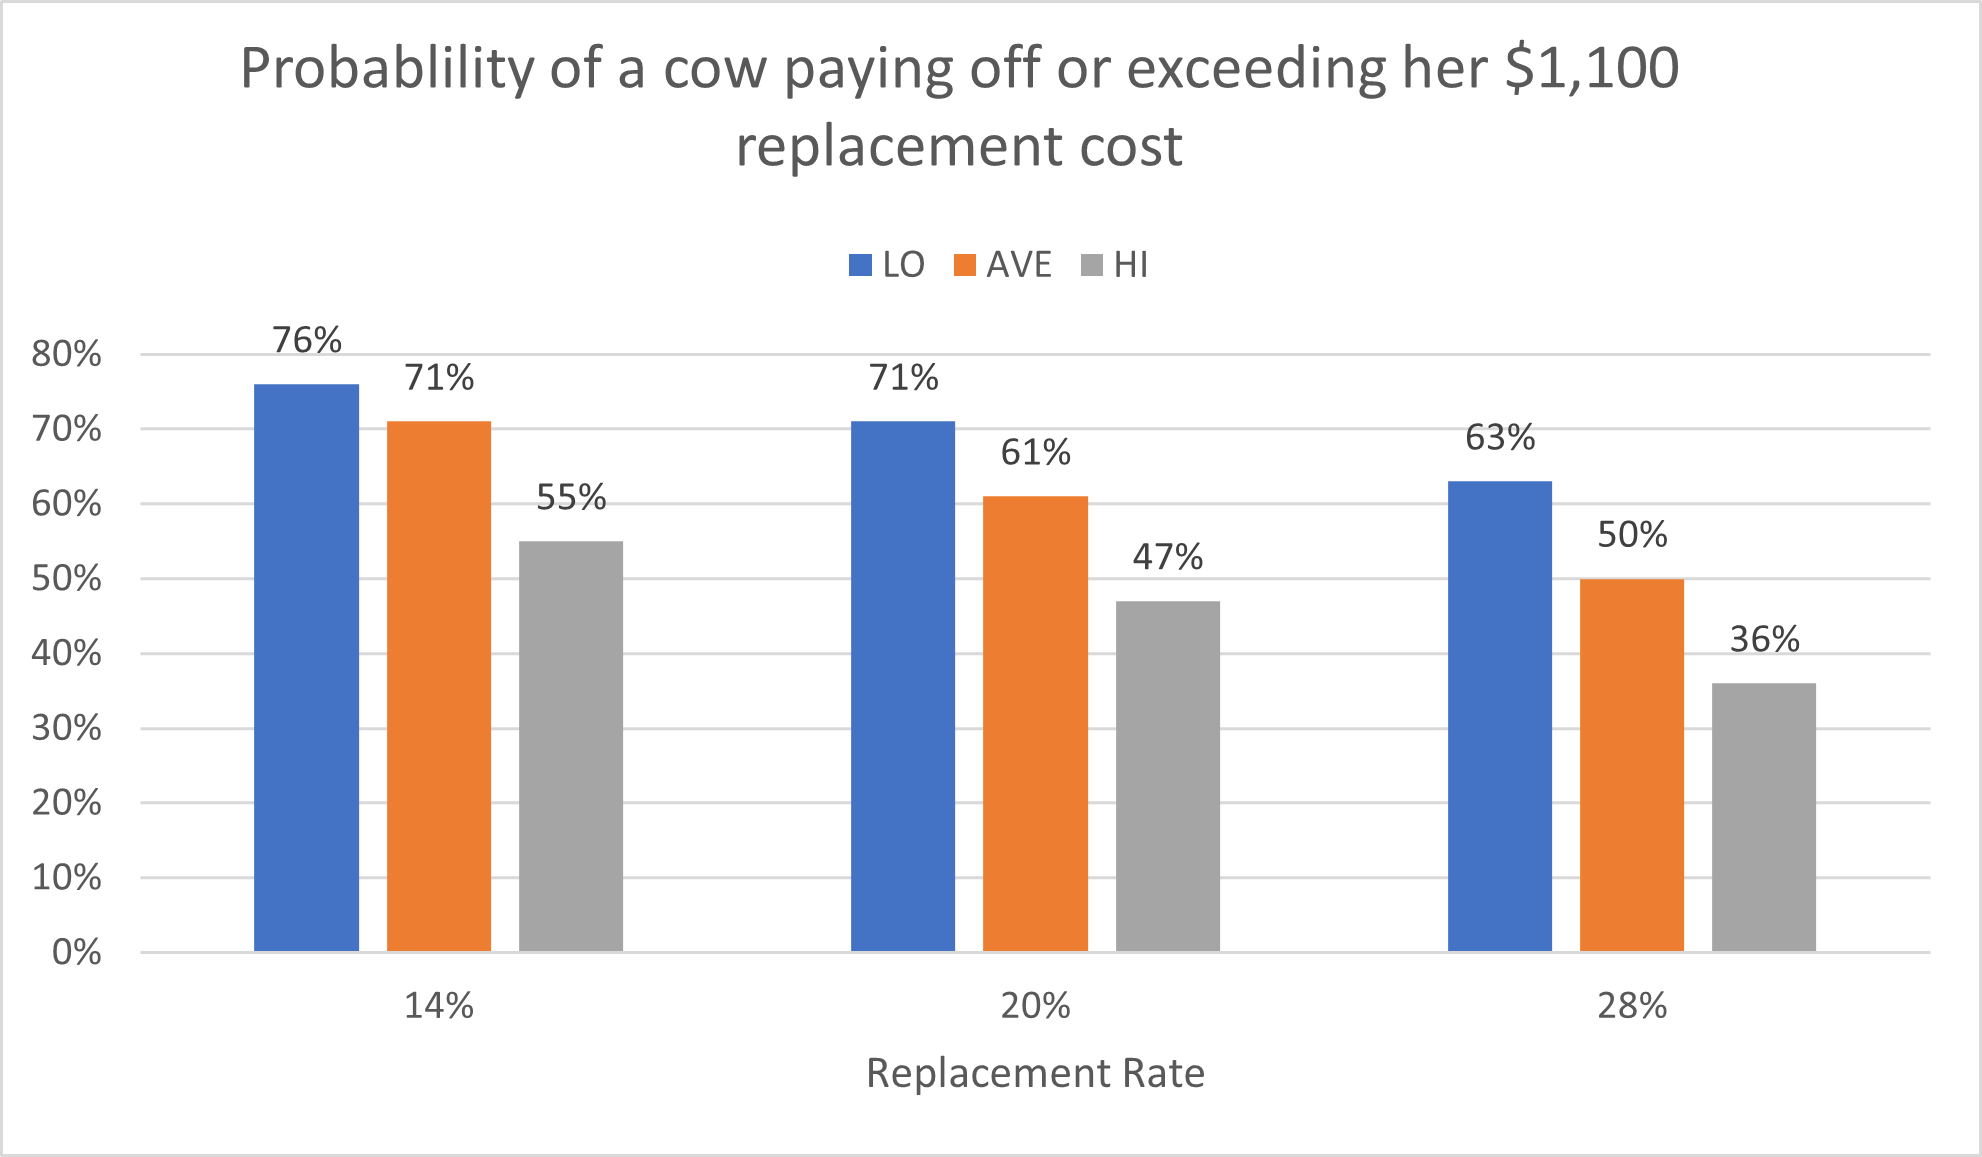 The chance of an individual cow paying off or exceeding the $1100/hd purchase cost